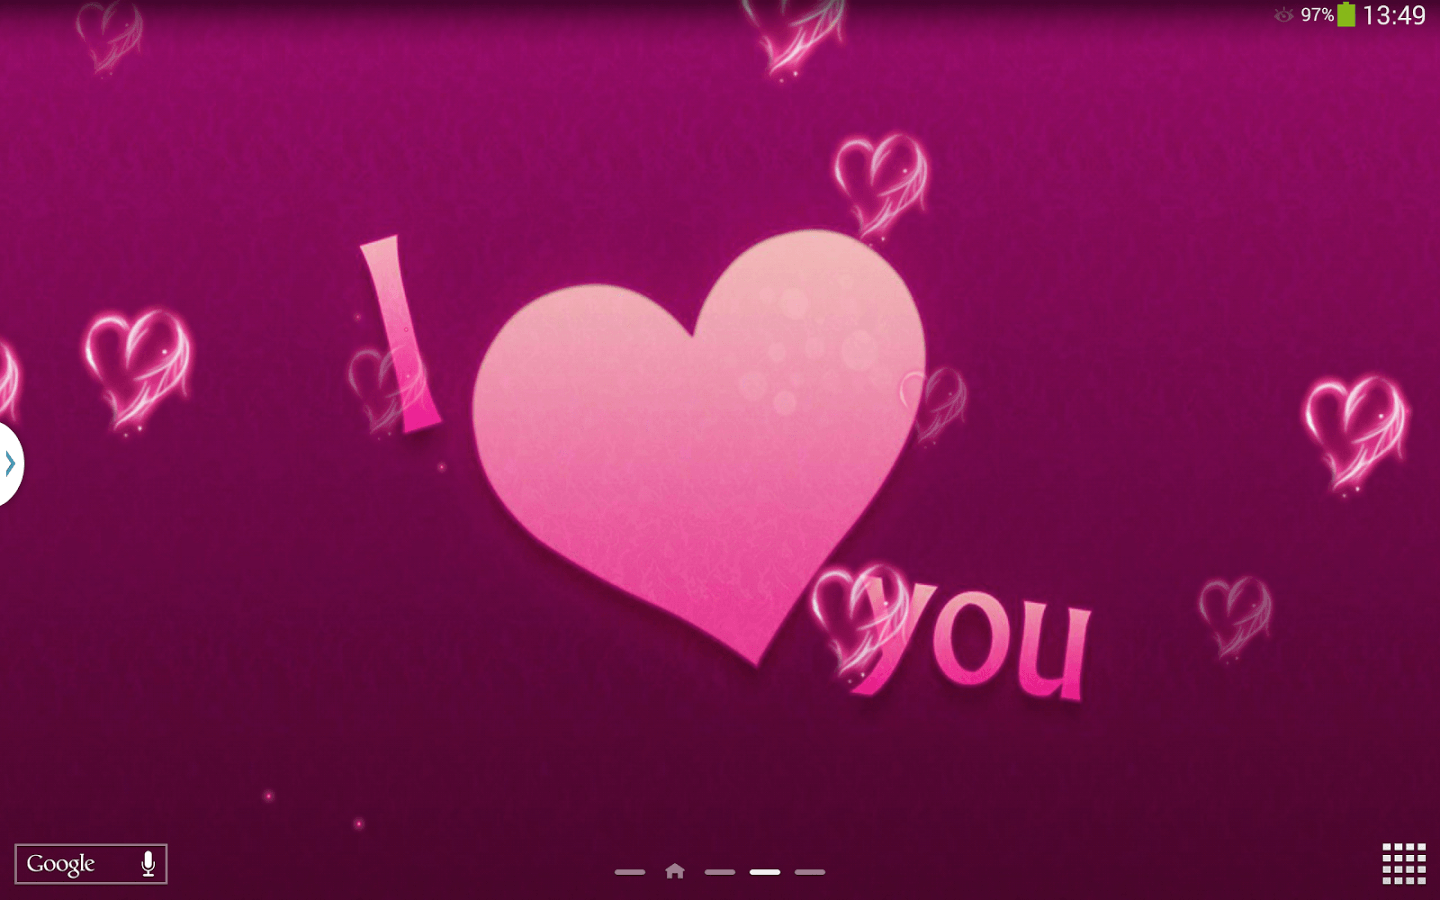 I Love You Live Wallpaper Apps on Google Play